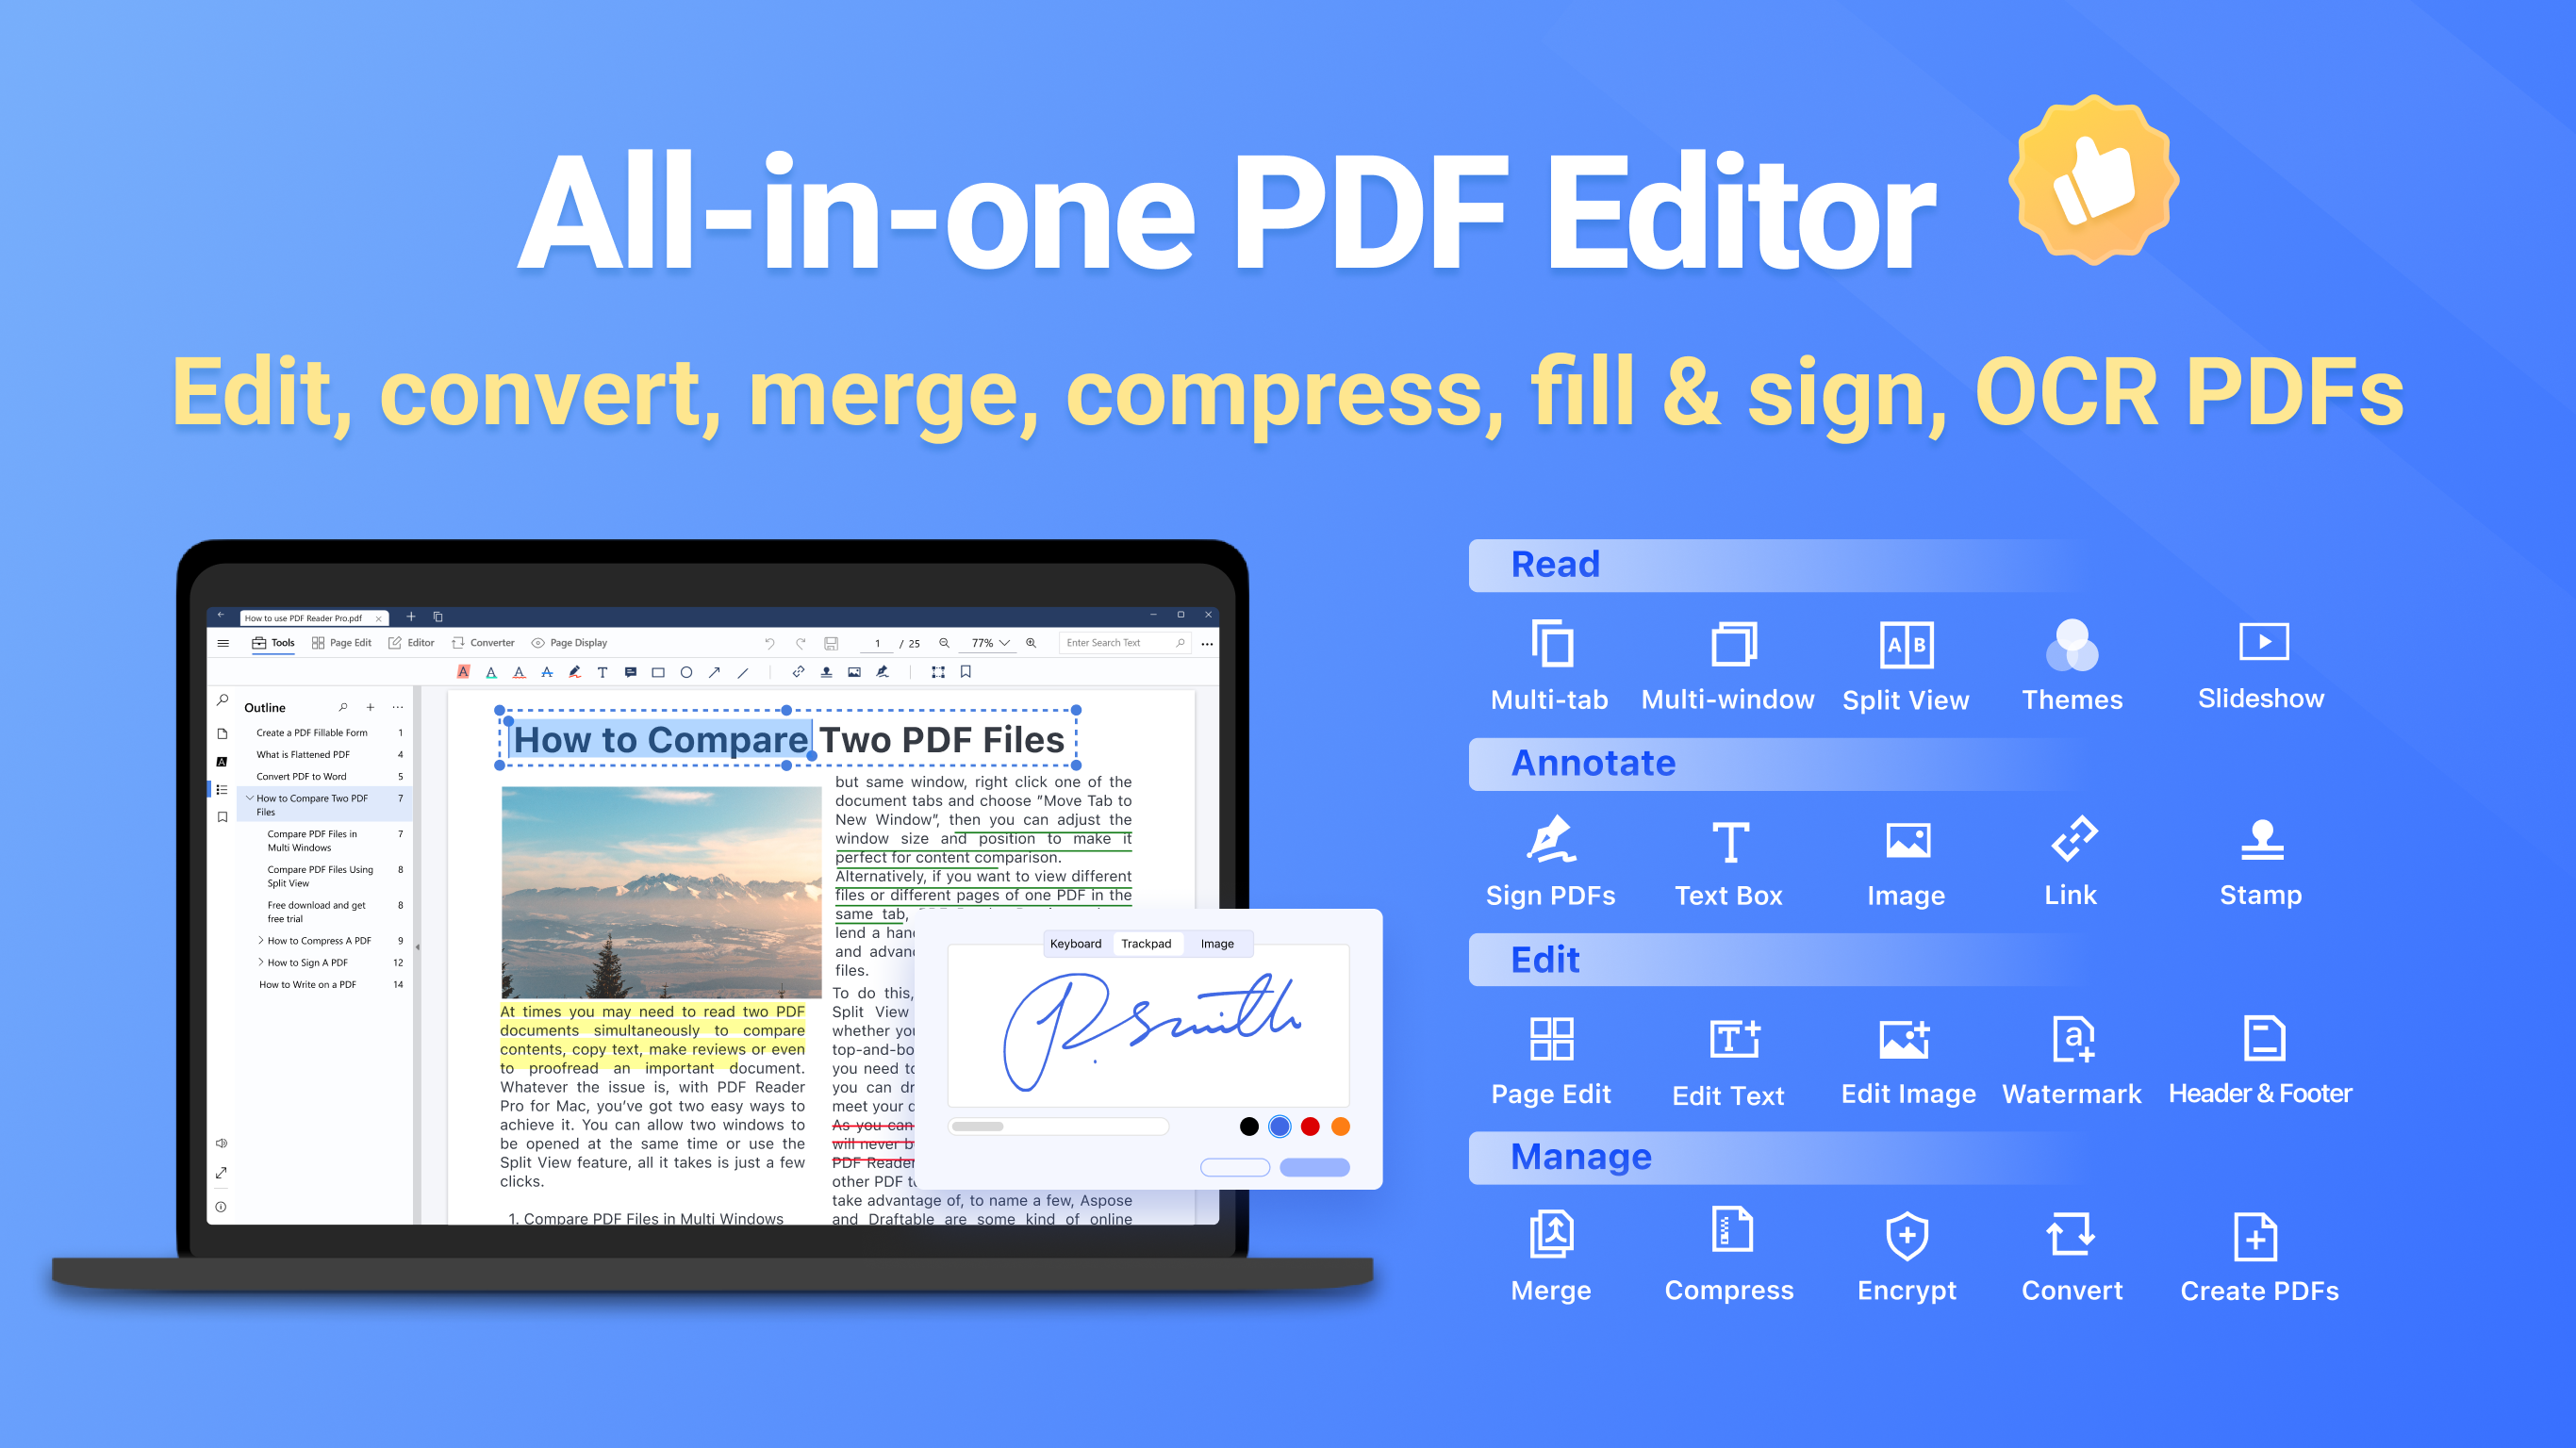 All-in-one PDF Editor